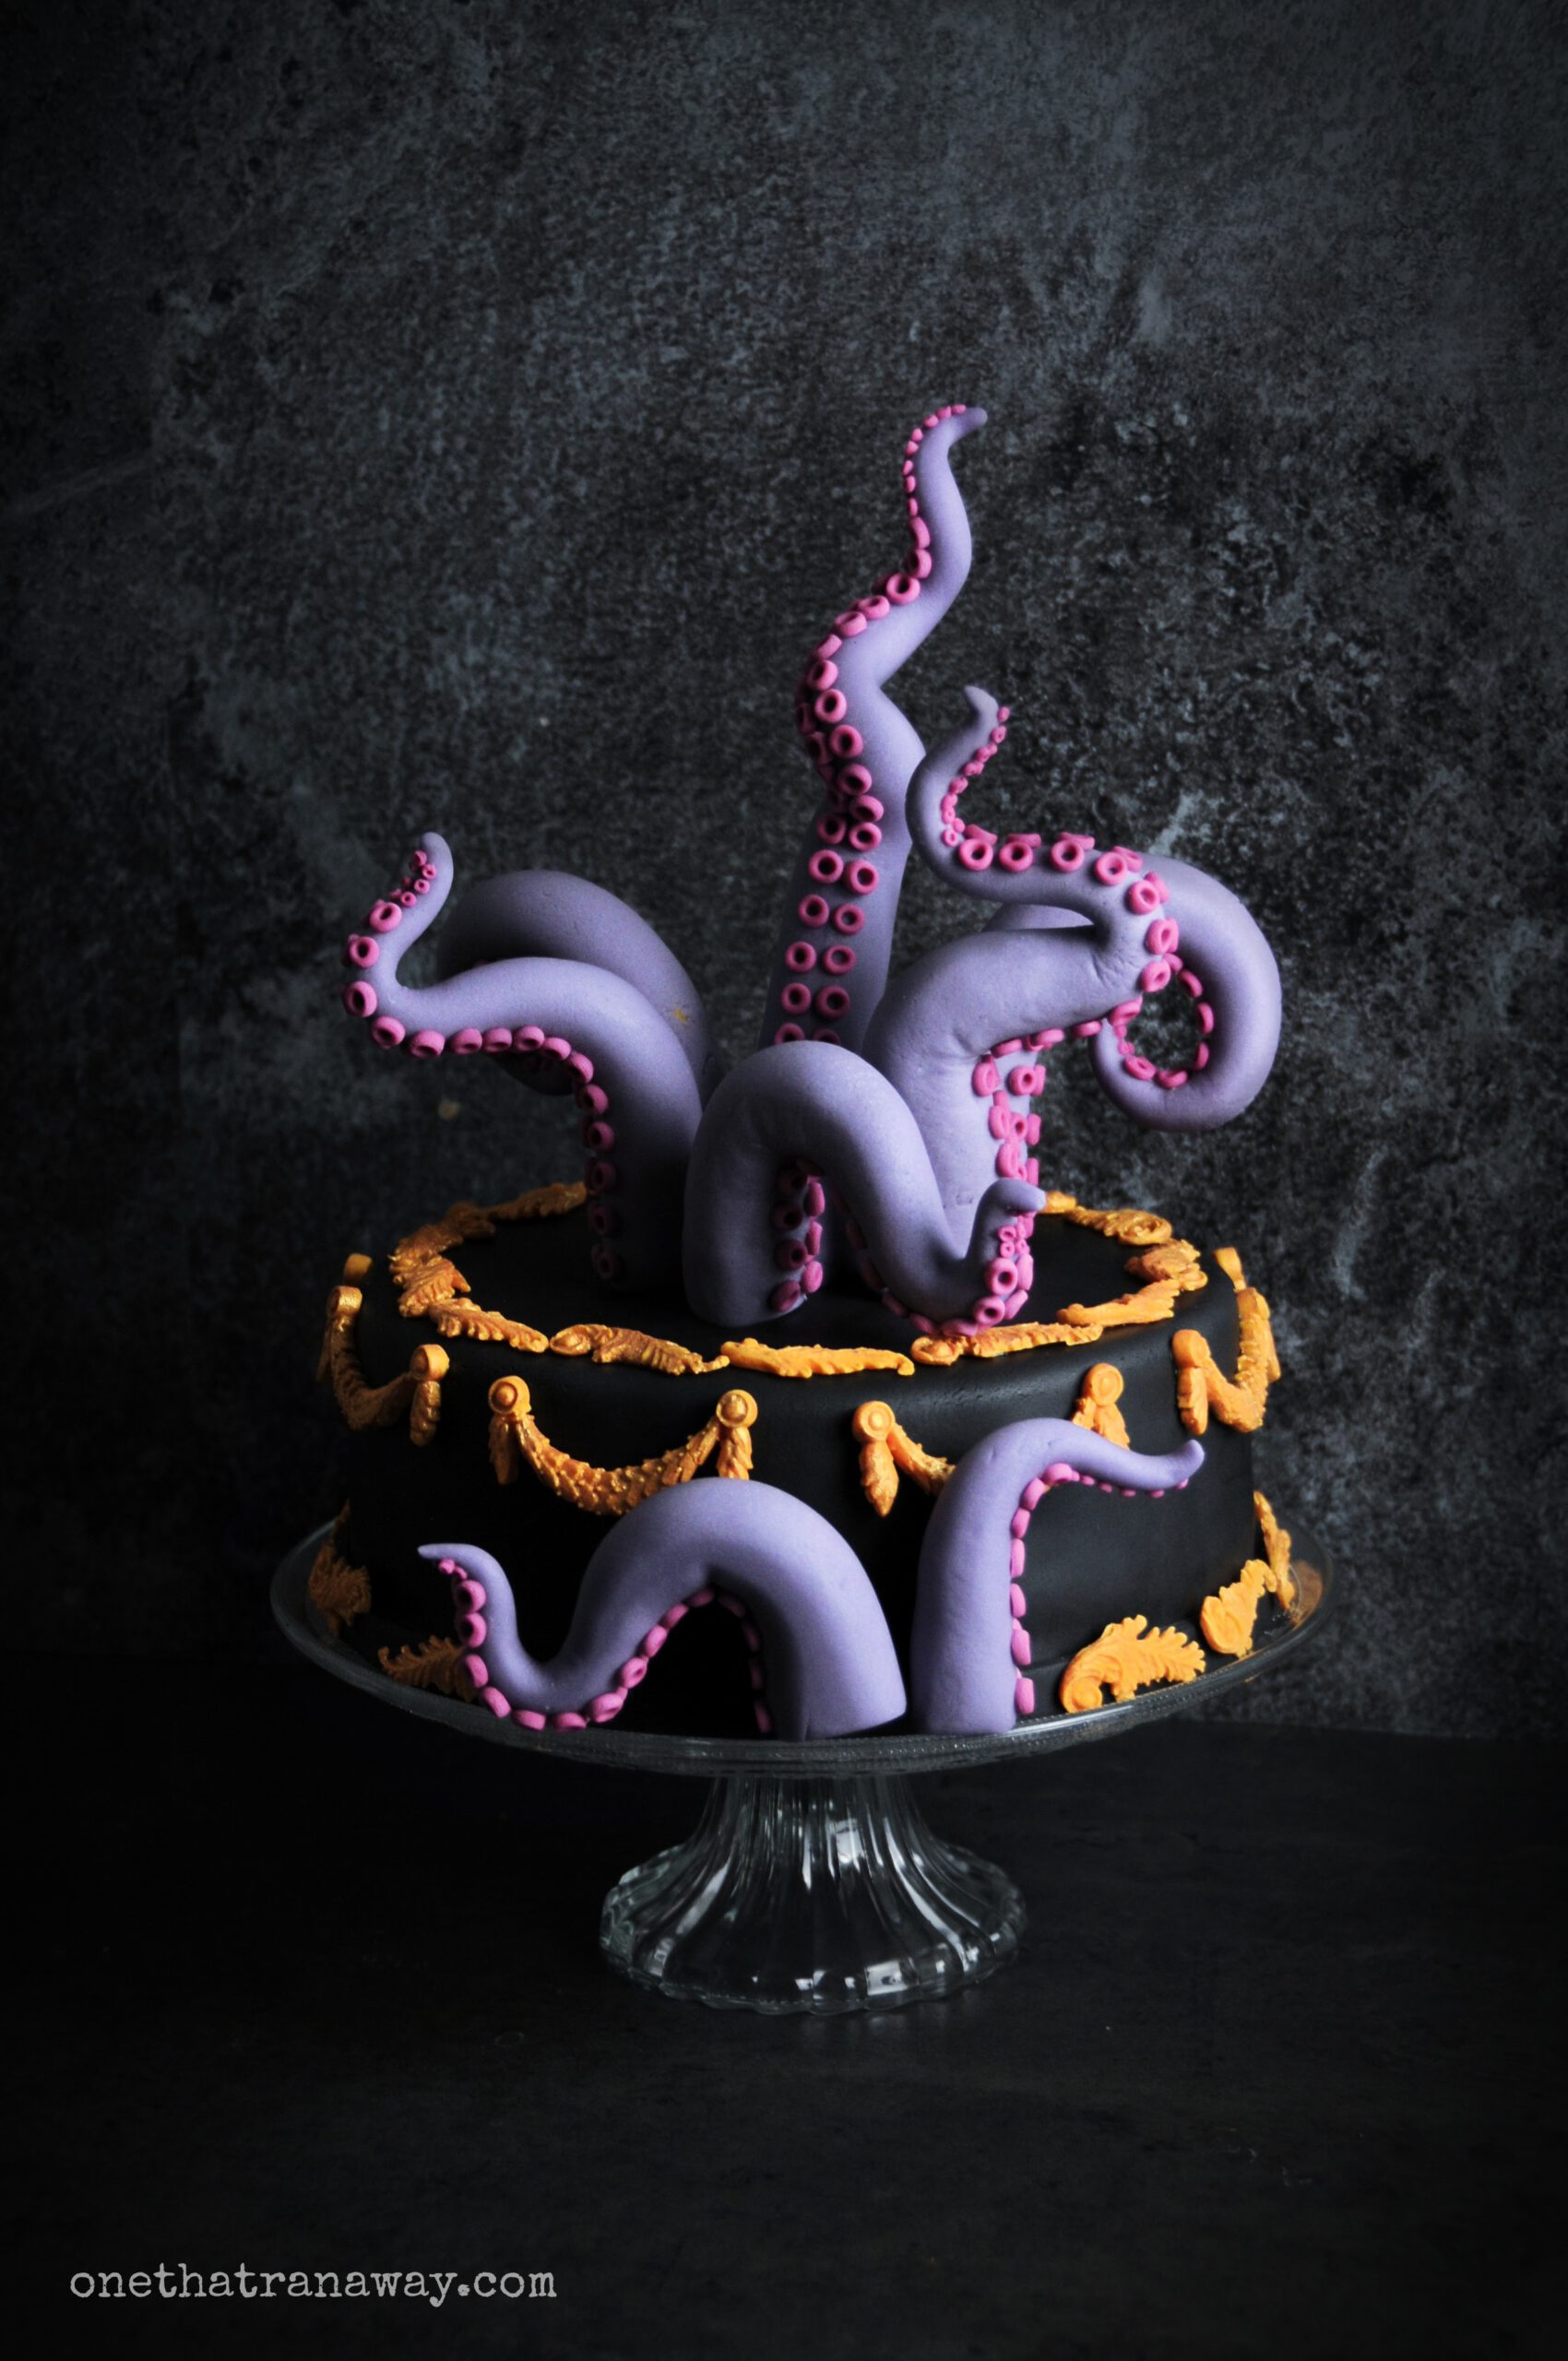 a black cake with purple fondant tentacles and gold ornaments on black background